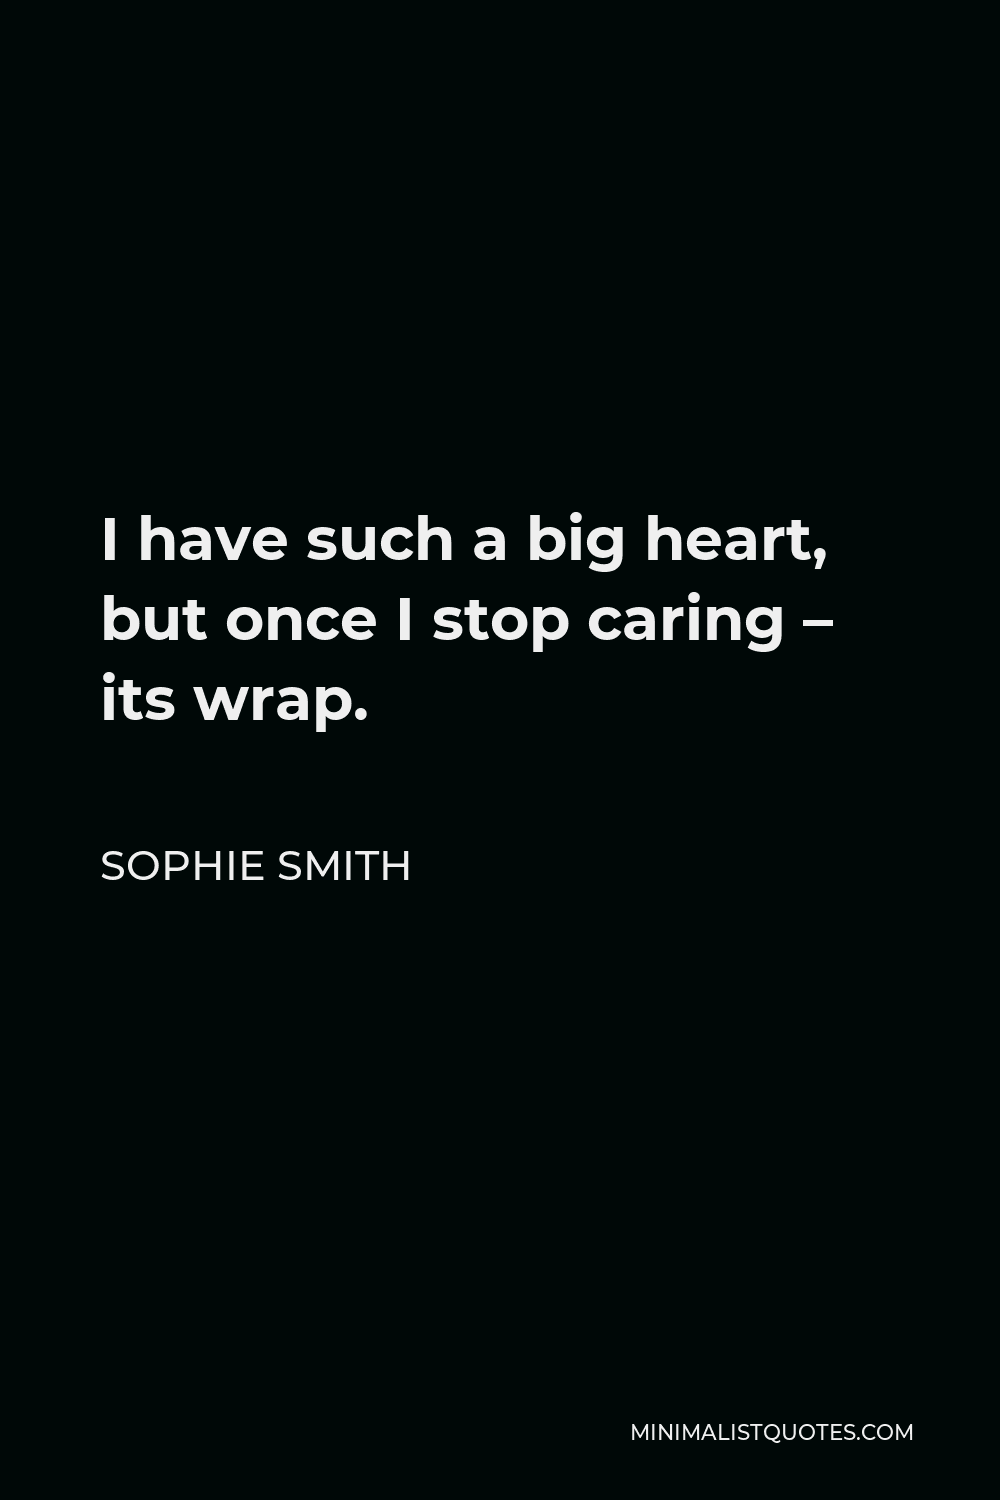 Sophie Smith Quote - I have such a big heart, but once I stop caring – its wrap.